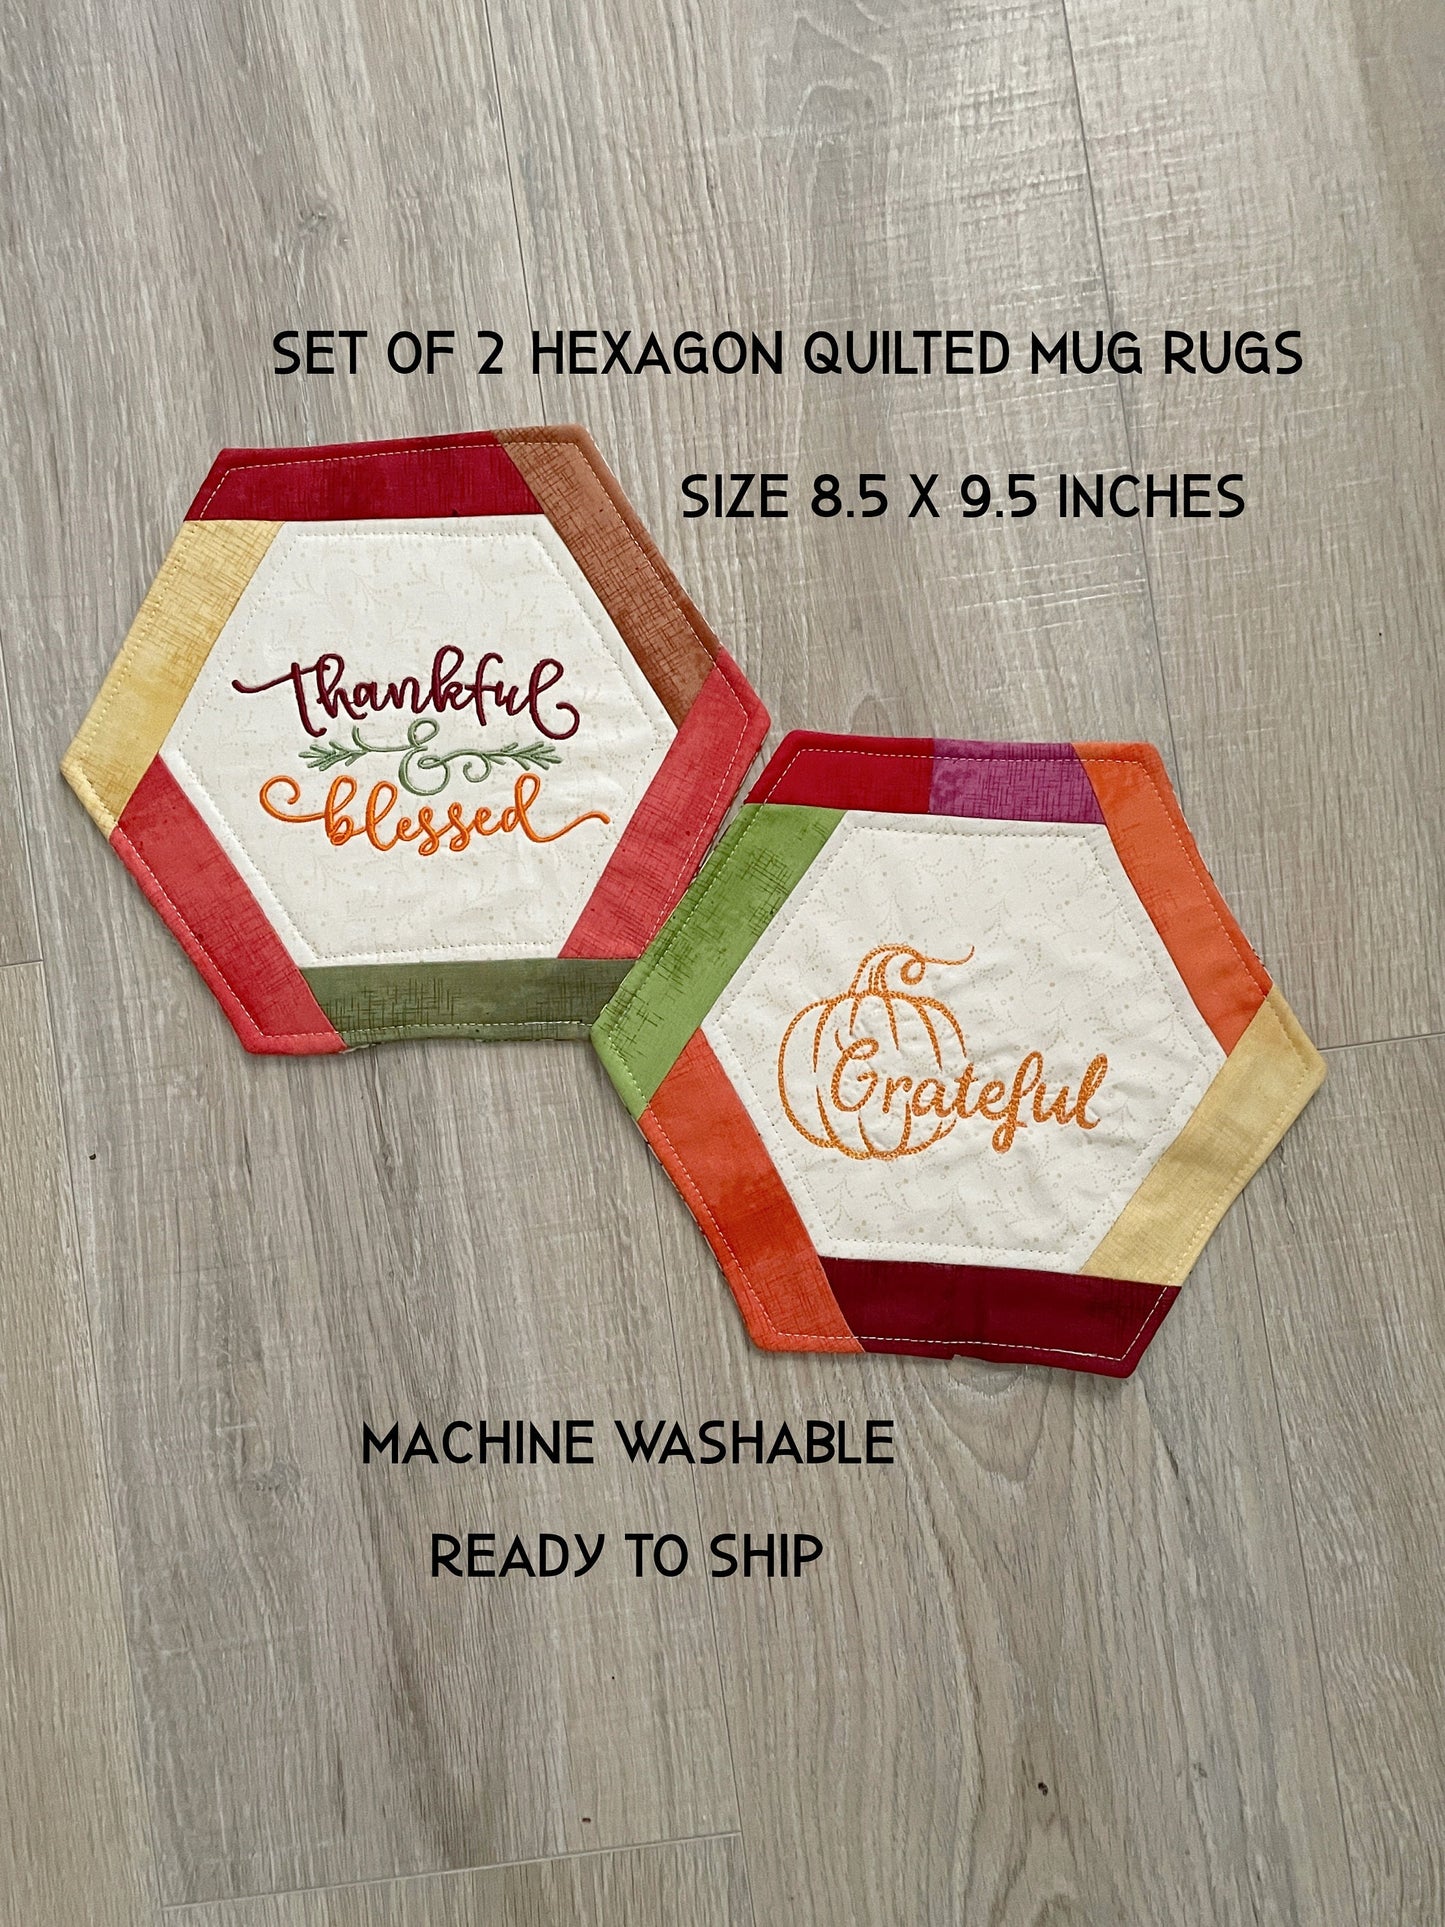 Autumn Drink Coasters, Quilted Mug Rug, Set of 2 Hexagon Shaped